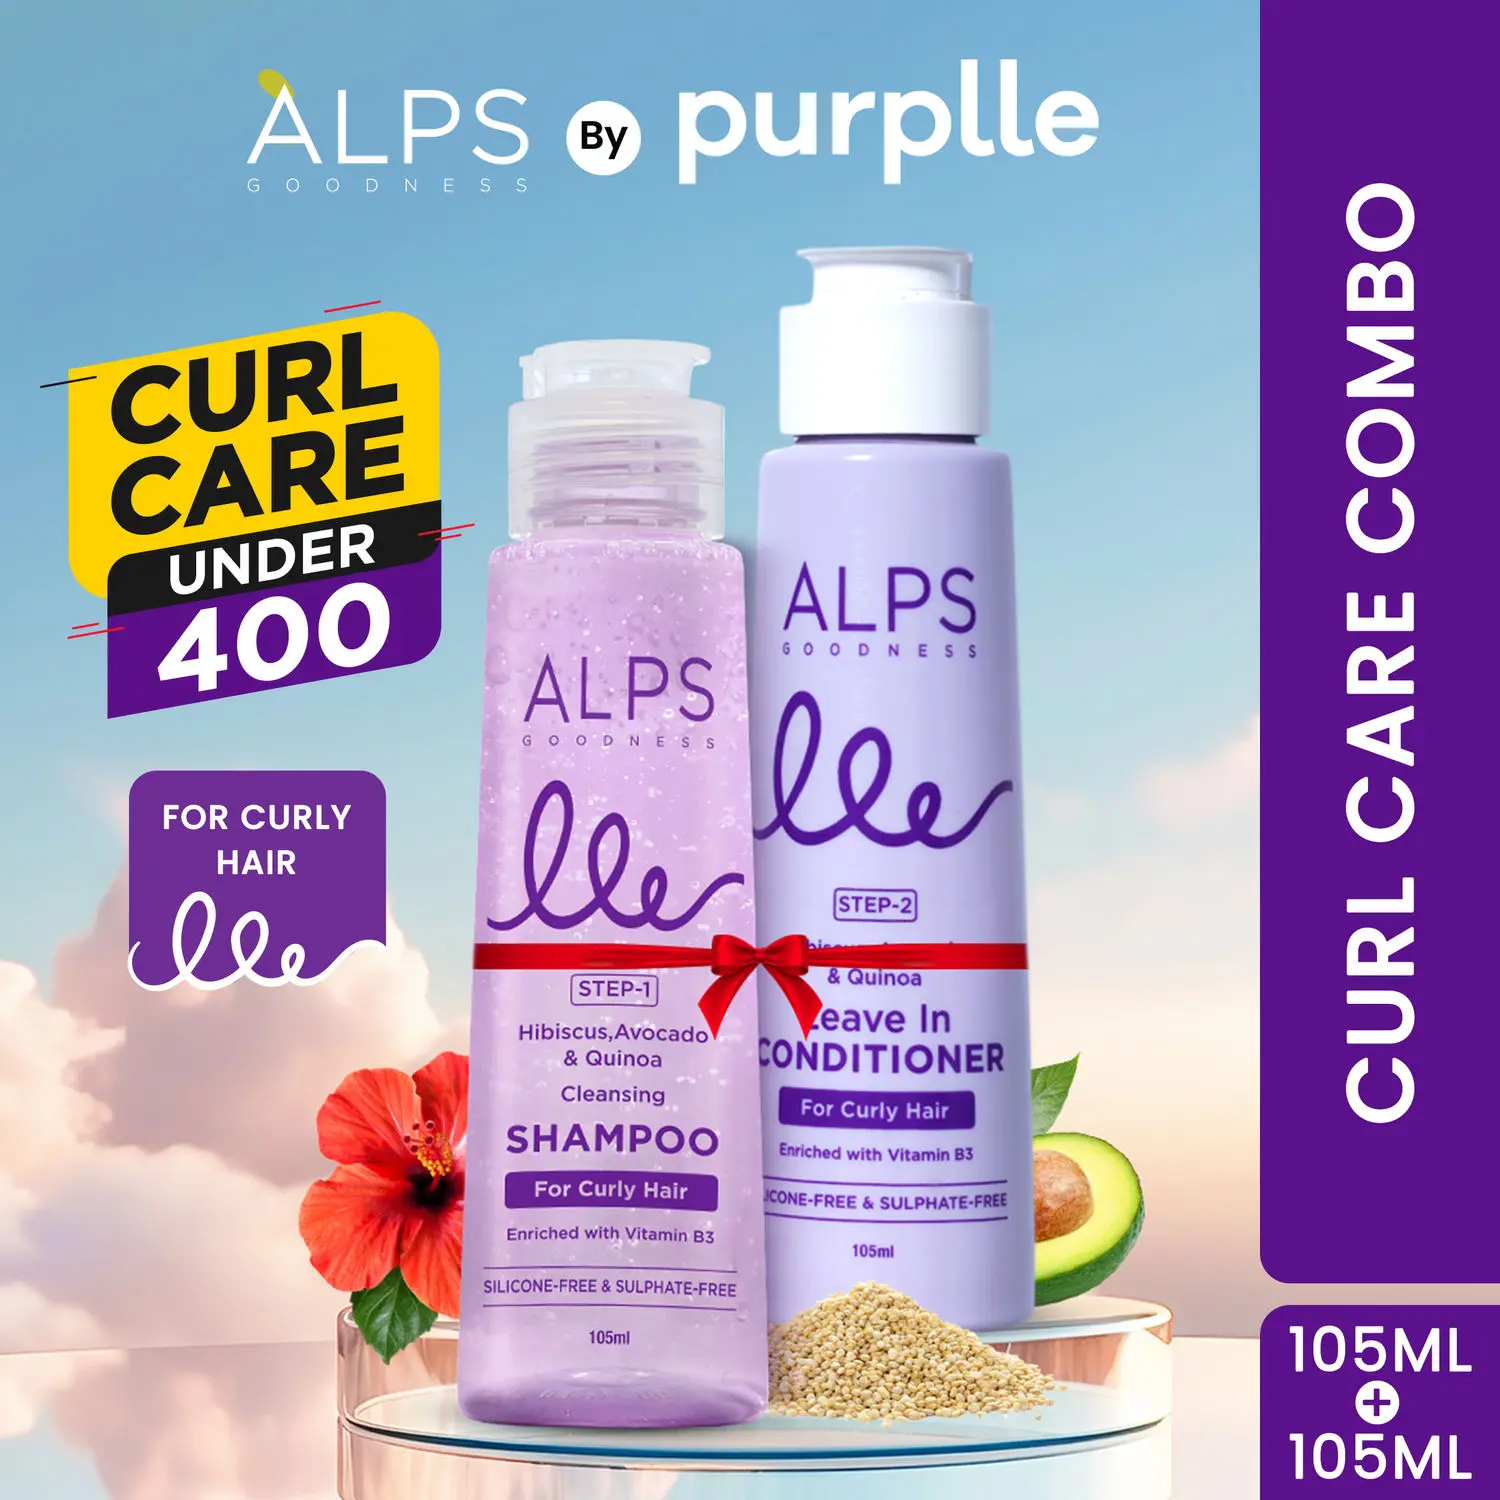 Alps Goodness Curl Combo Shampoo & Conditioner with Avocado & Hibiscus for Curly & Wavy Hair (210 ml)